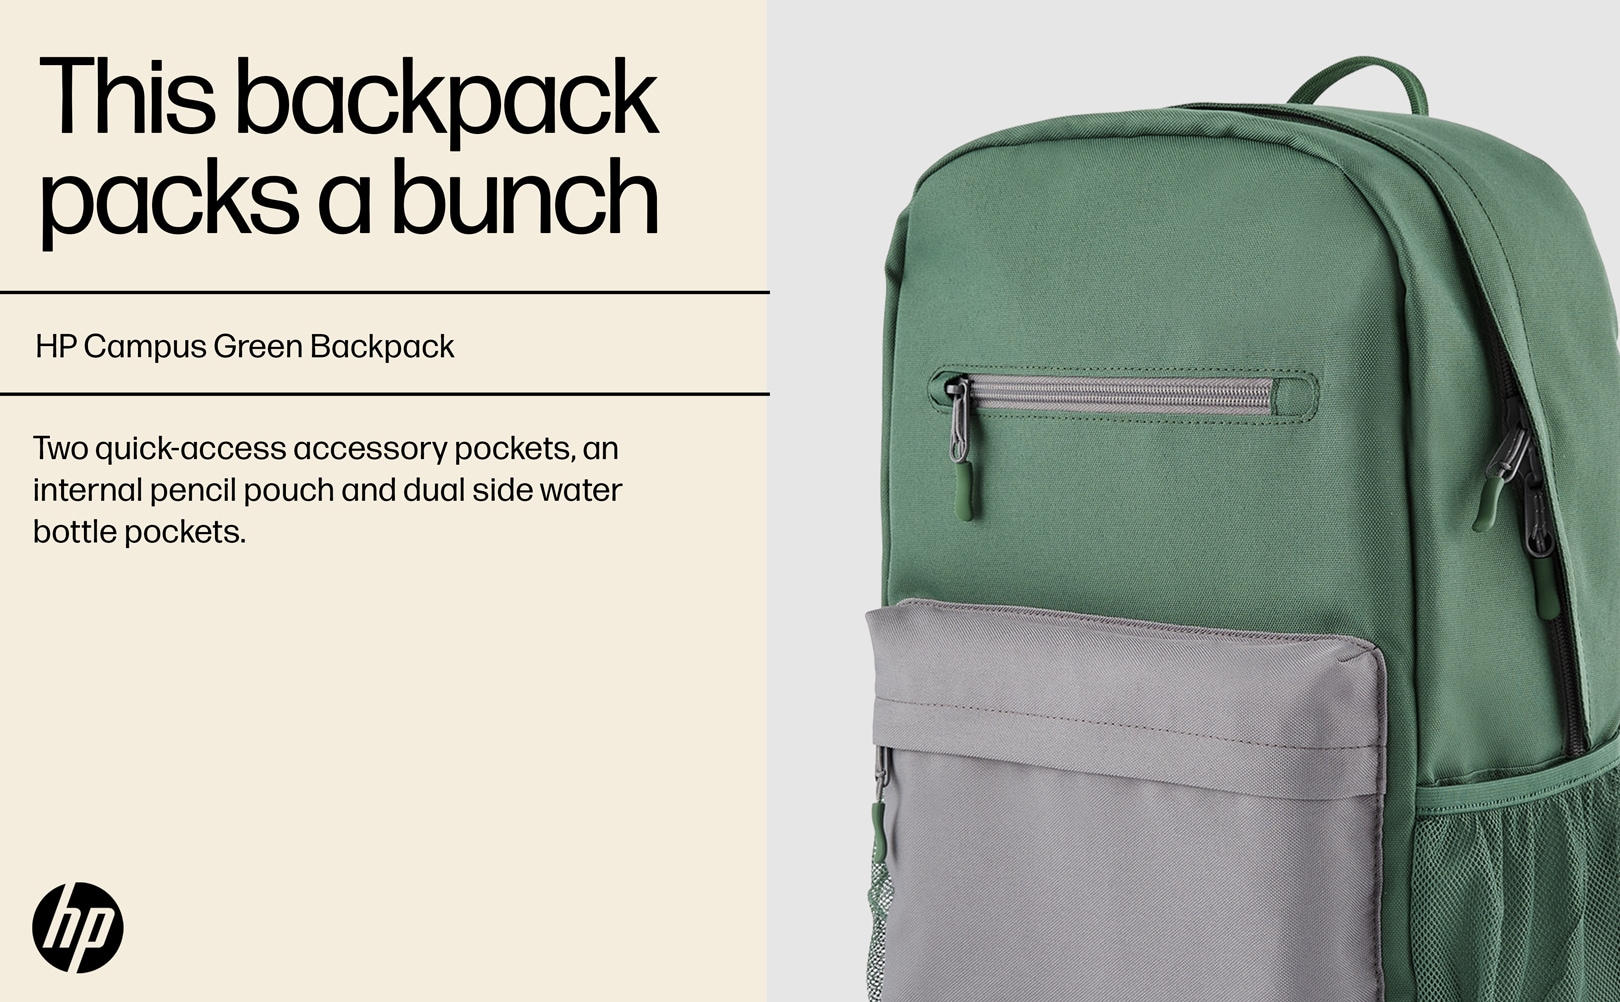 This backpack packs a bunch